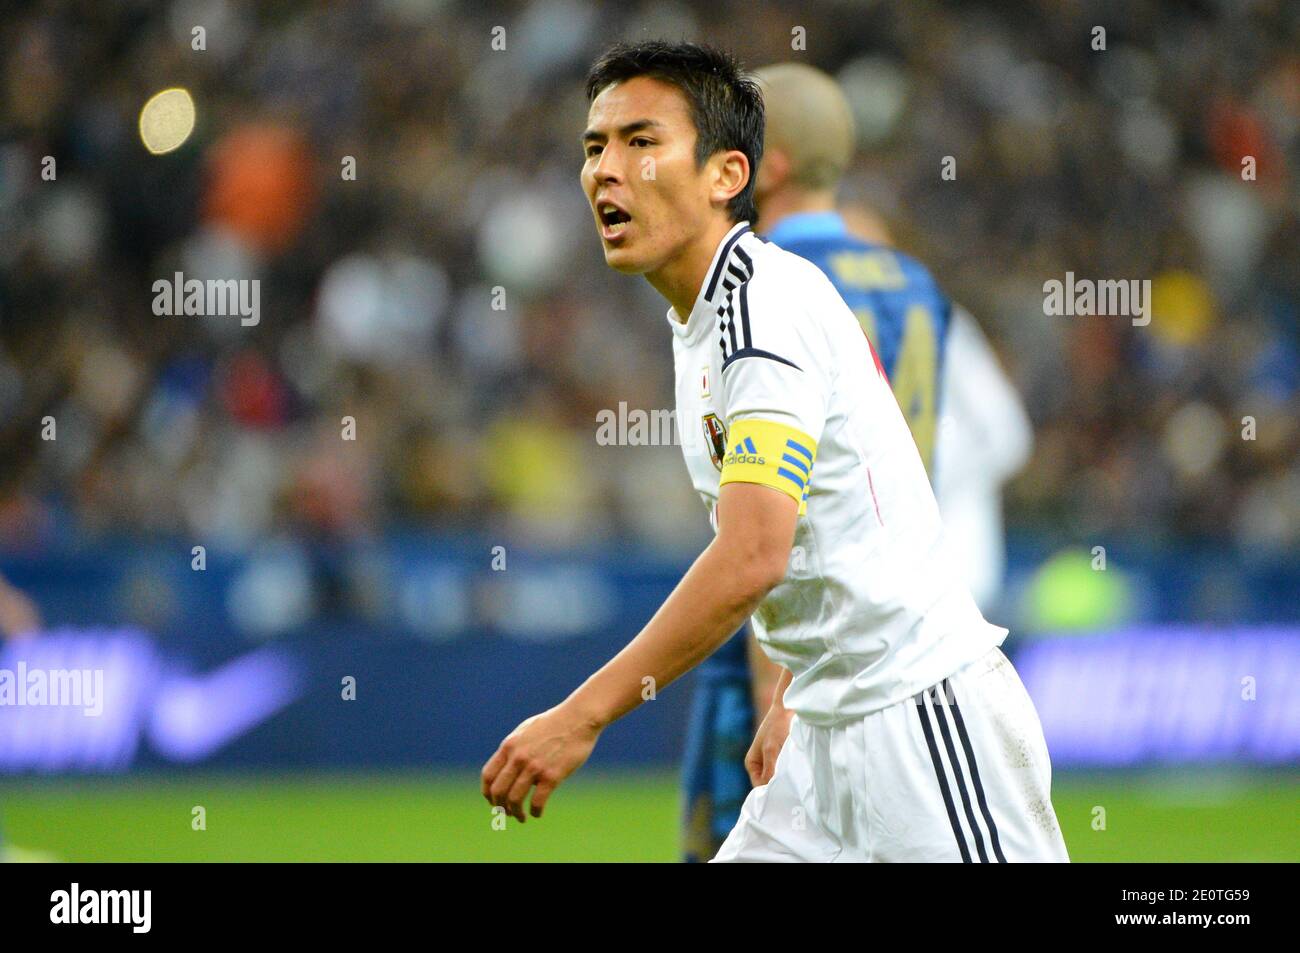 Japan's Makoto Hasebe during the Friendly International Soccer match, France Vs Japan at Stade de France in Saint-Denis suburb of Paris, France on October 12, 2012. Japan won 1-0. Photo by Christian Liewig/ABACAPRESS.COM Stock Photo